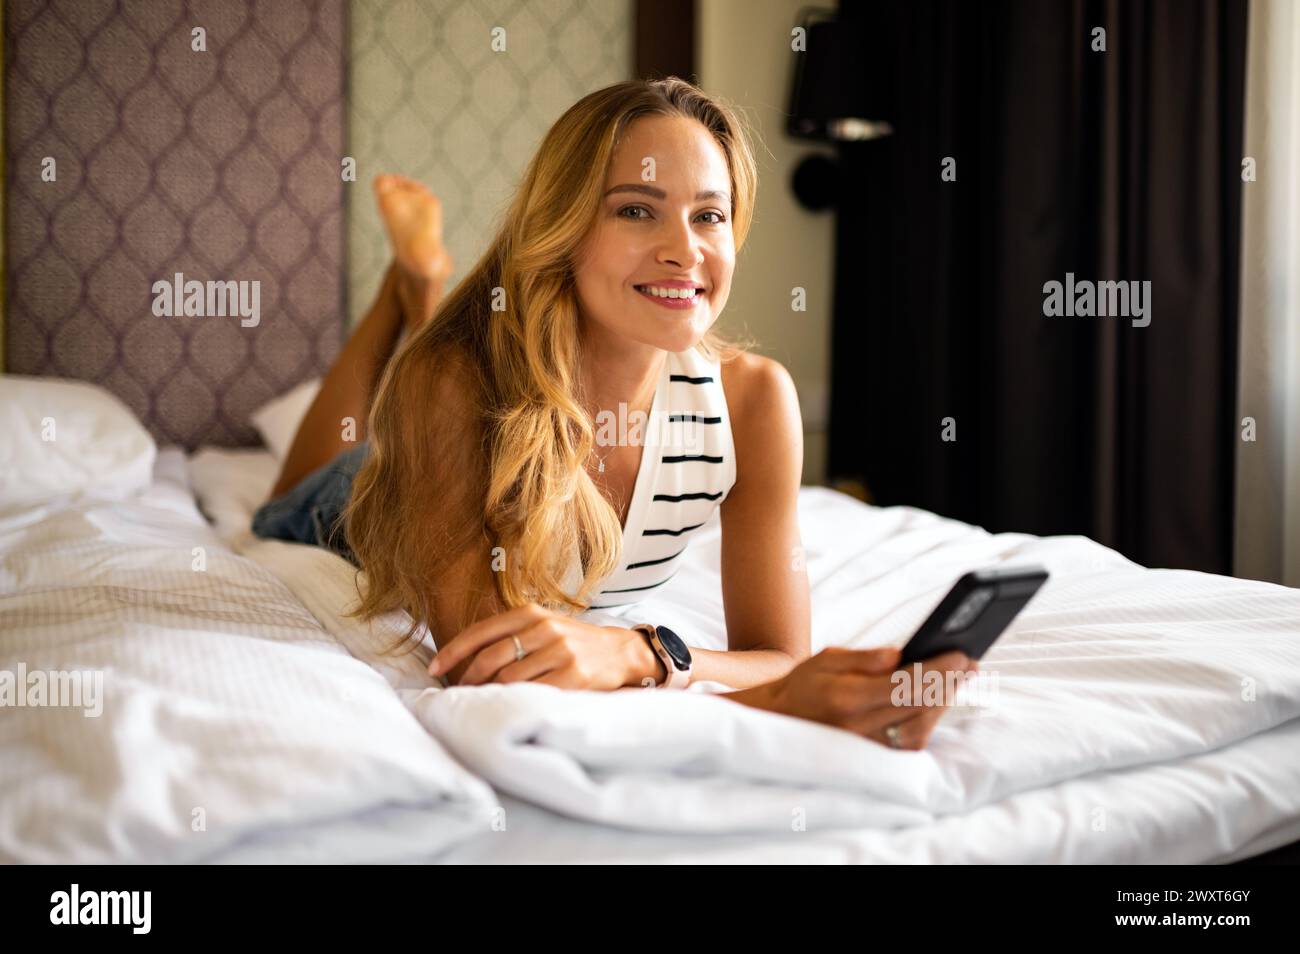 Happy barefoot young woman looking at mobile phone in bed Stock Photo